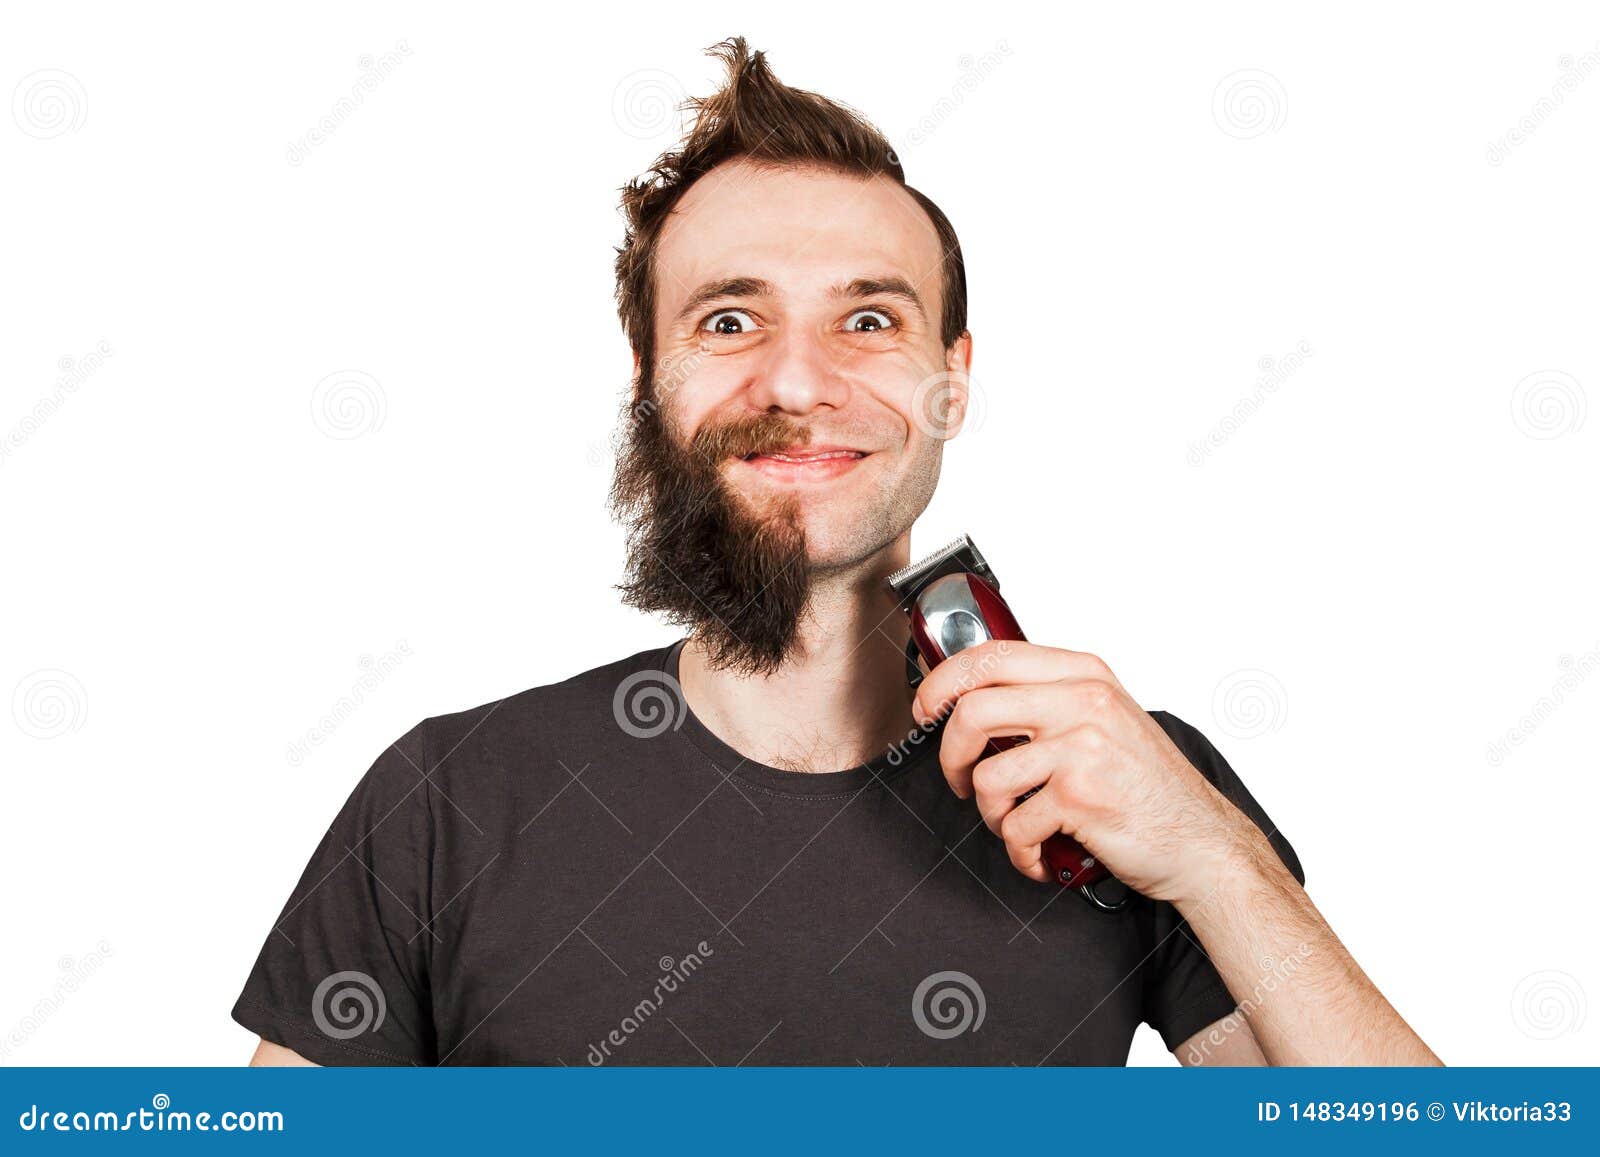 shave beard with hair clippers